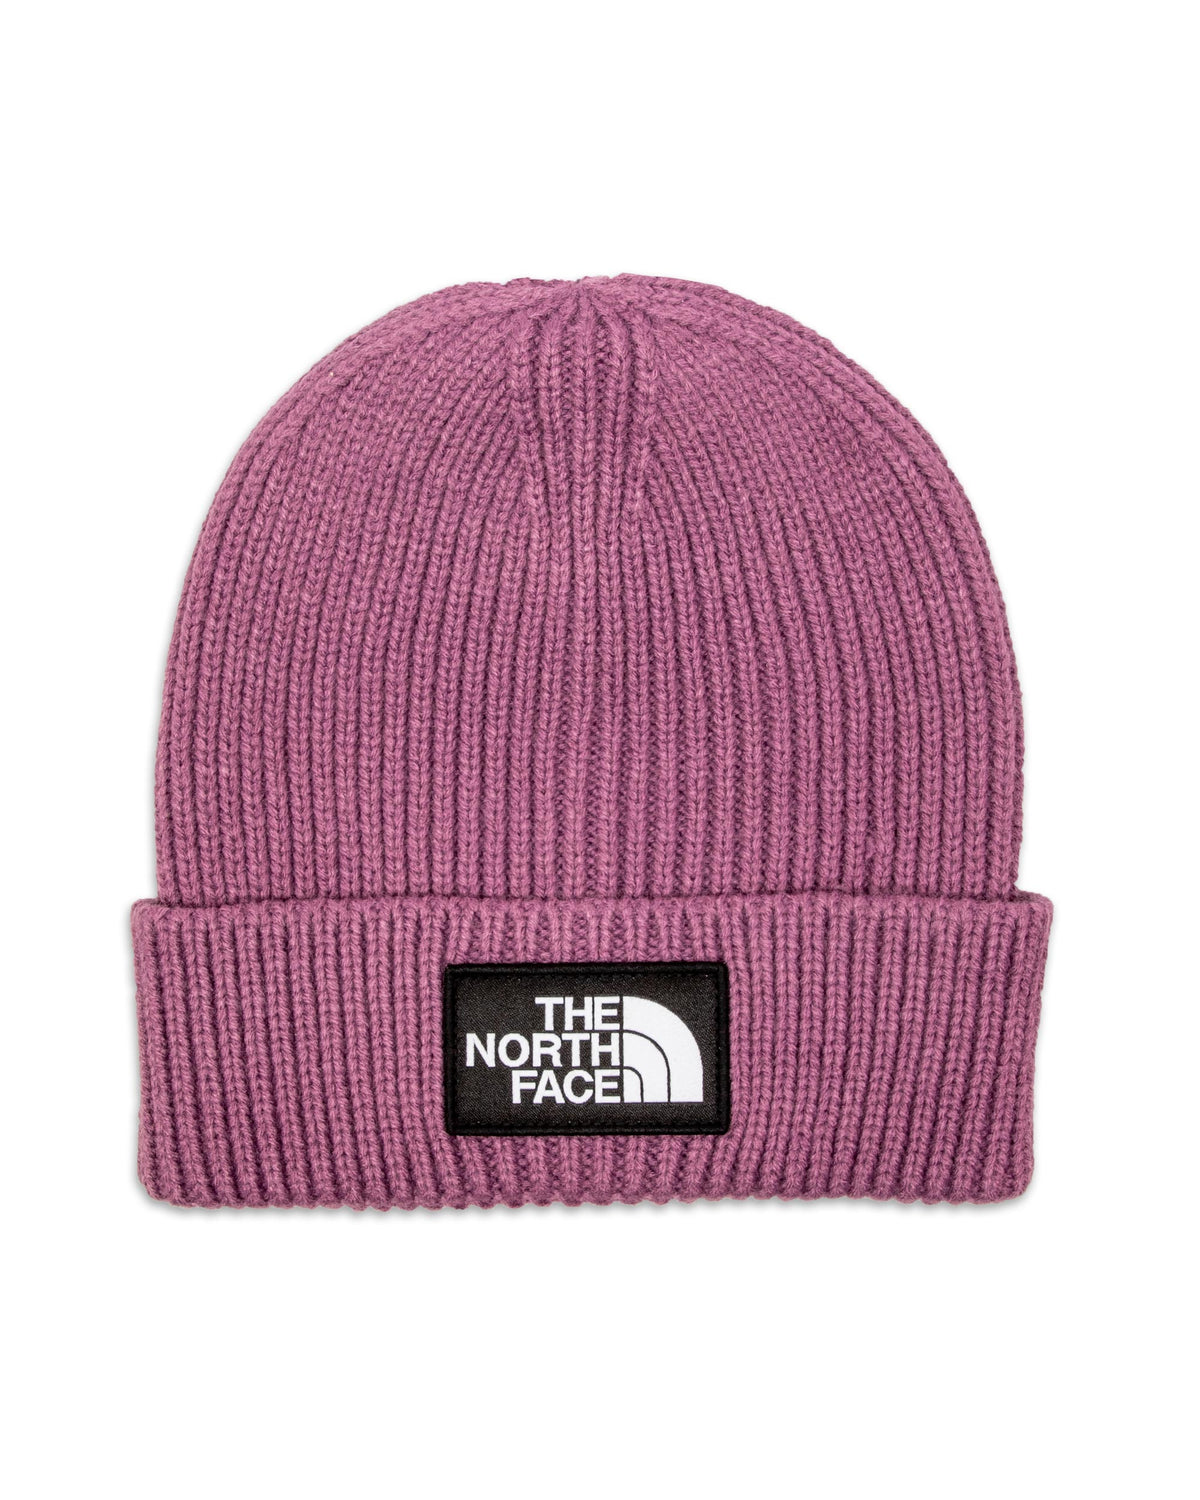 Beanie Hat The North Face NF0A3FJX0H5